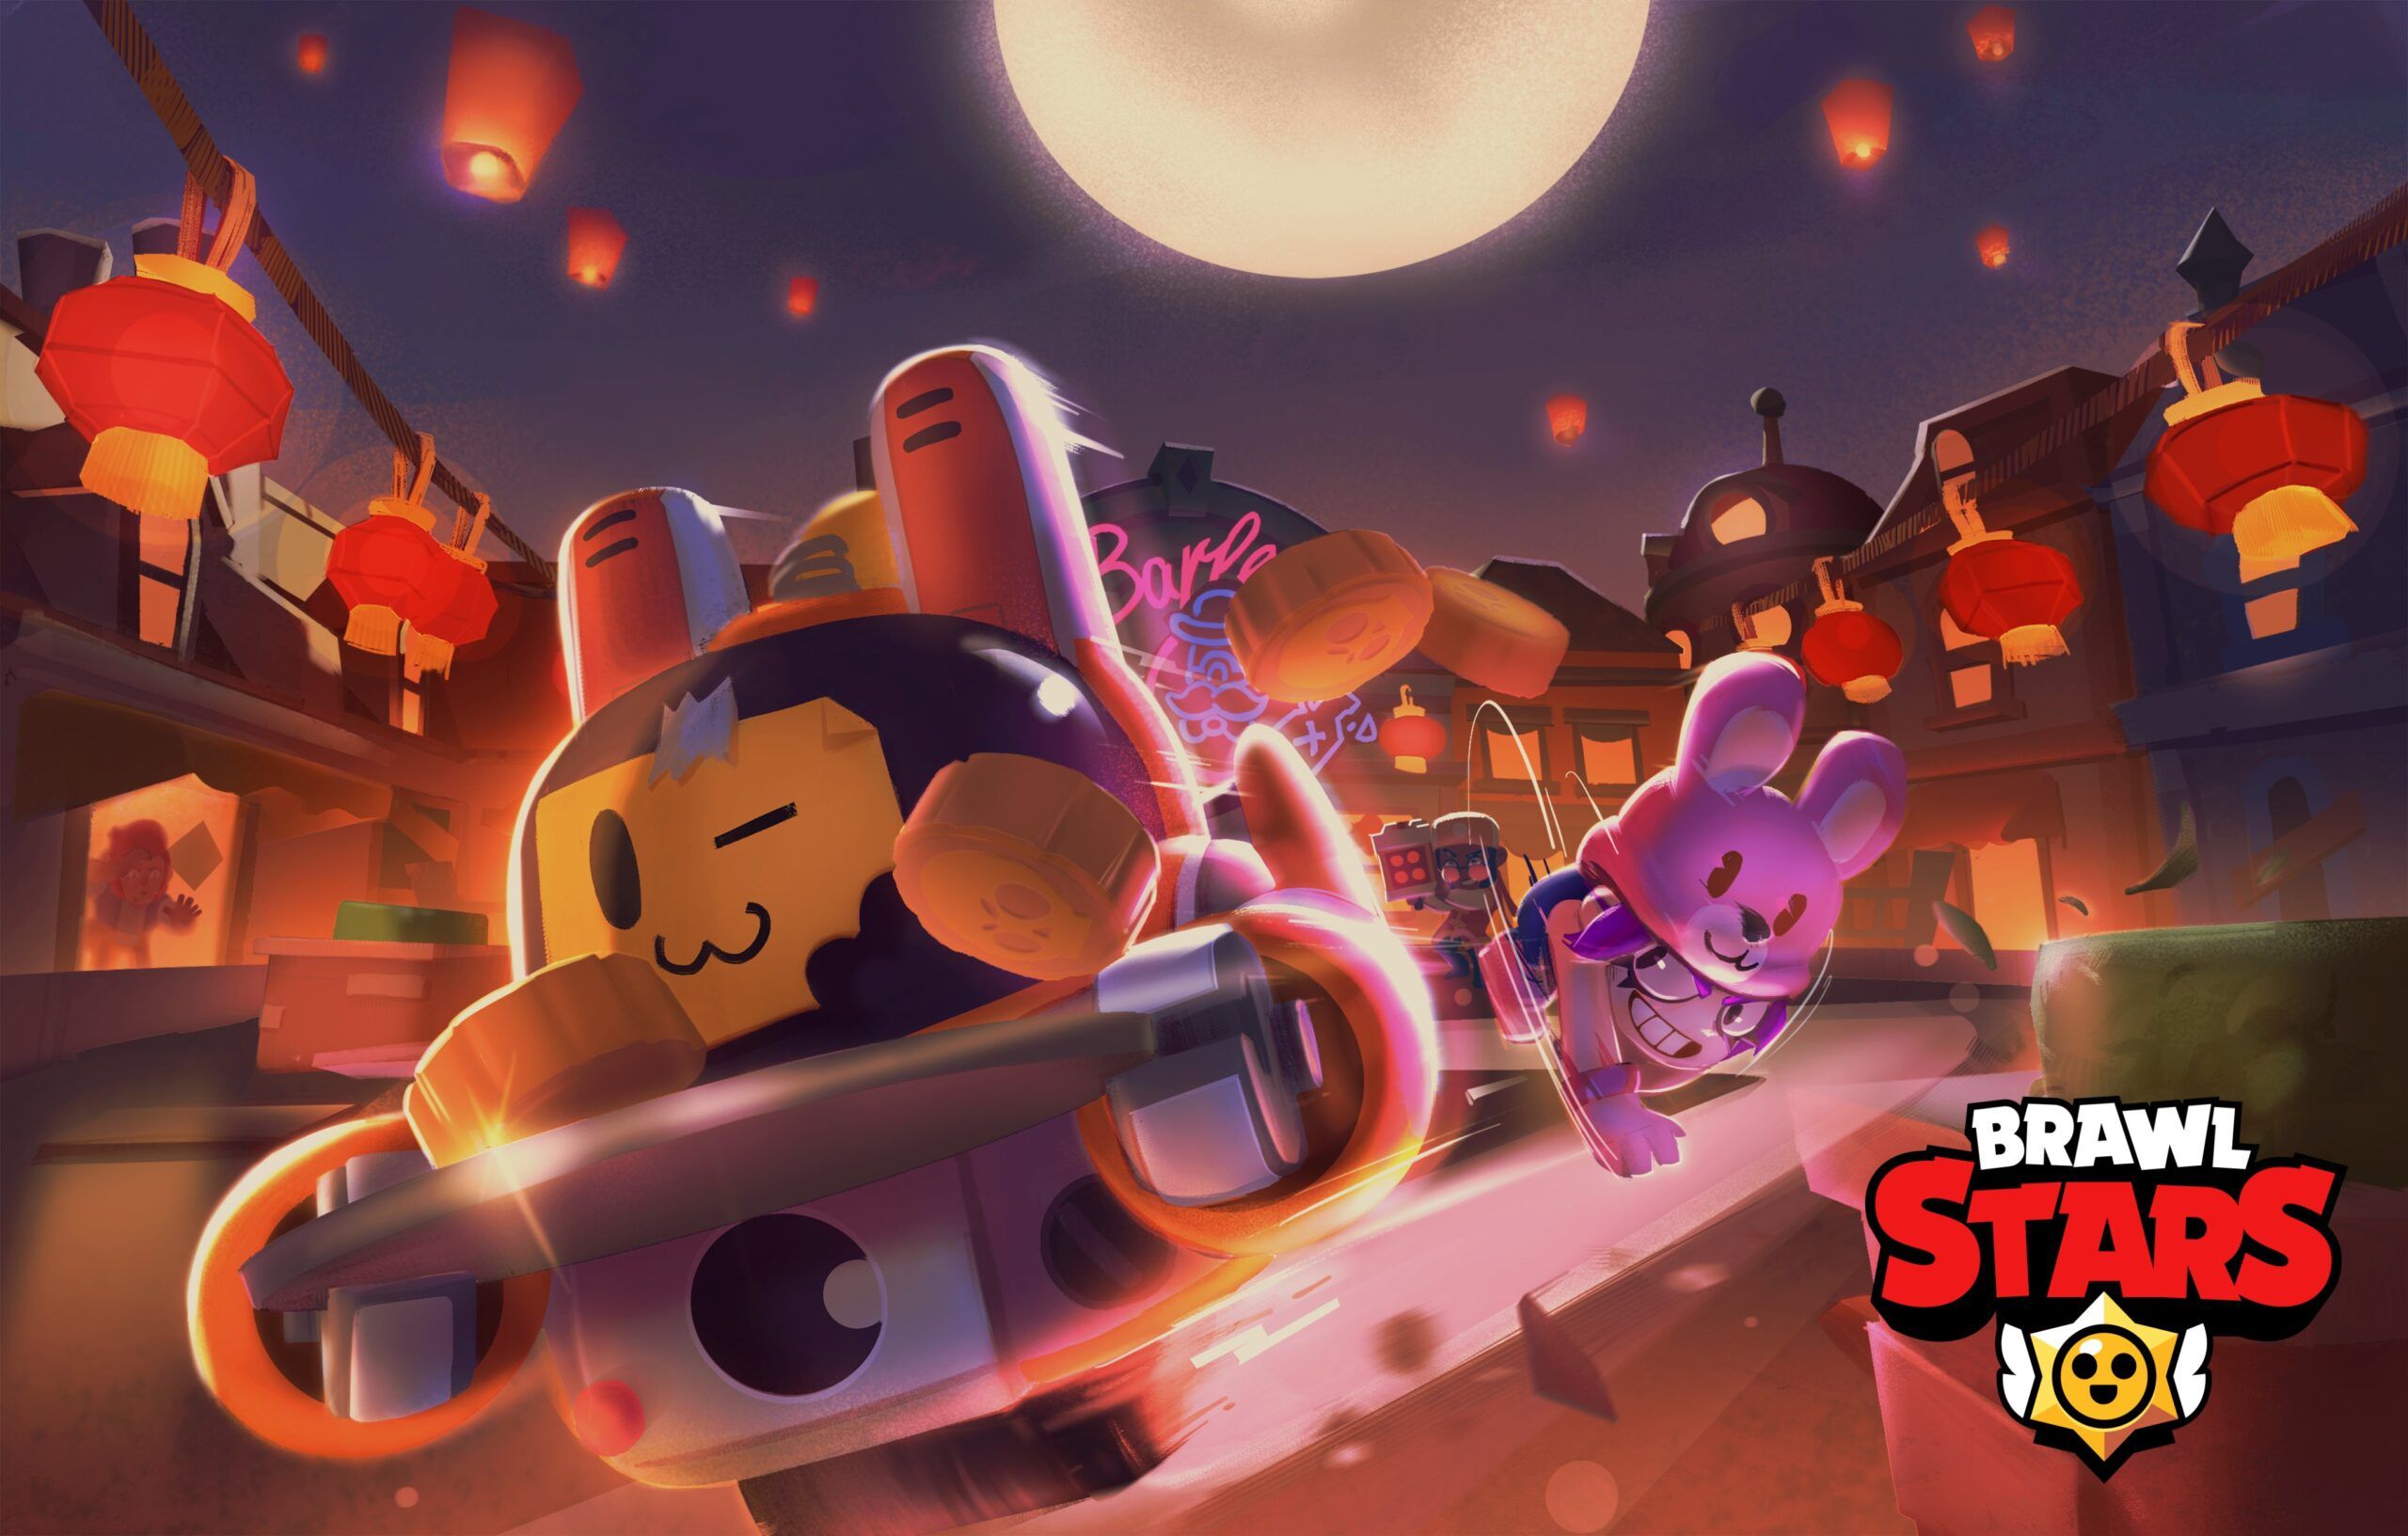 Brawl Stars: Moon Festival event featuring new Sprout skin is now live Game Guides